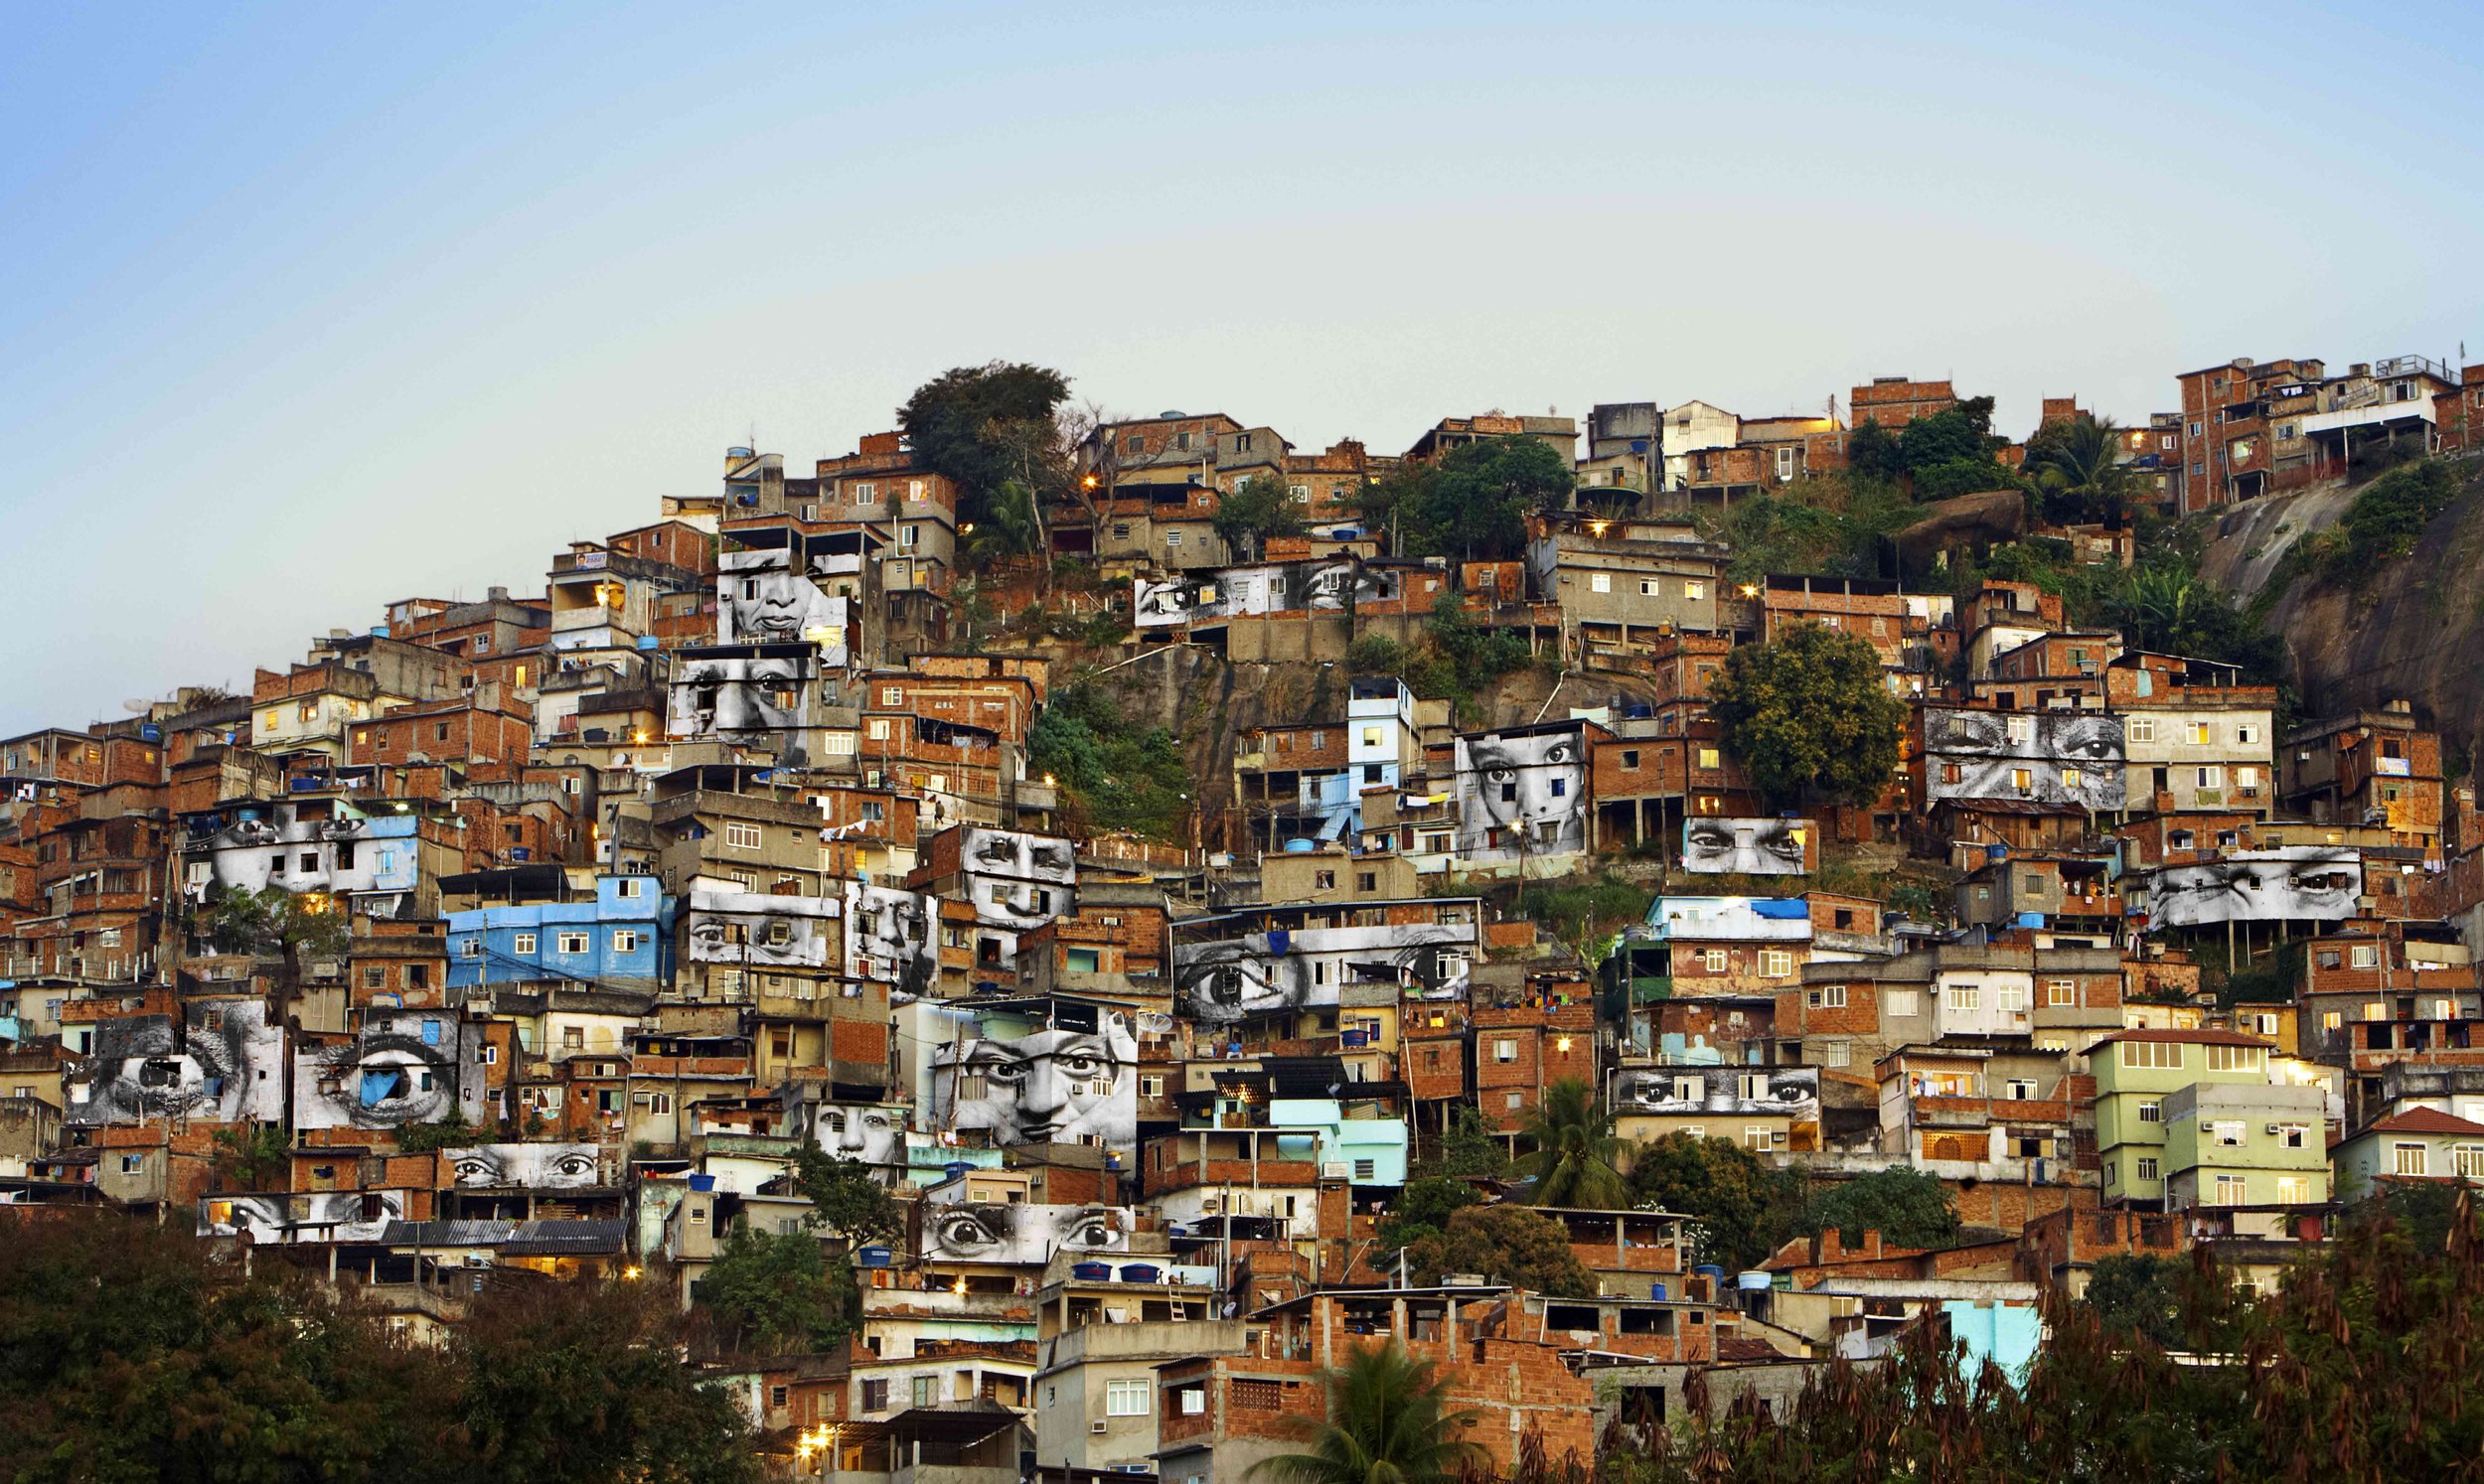 Brazil - Favela culture - hair styling and passinho